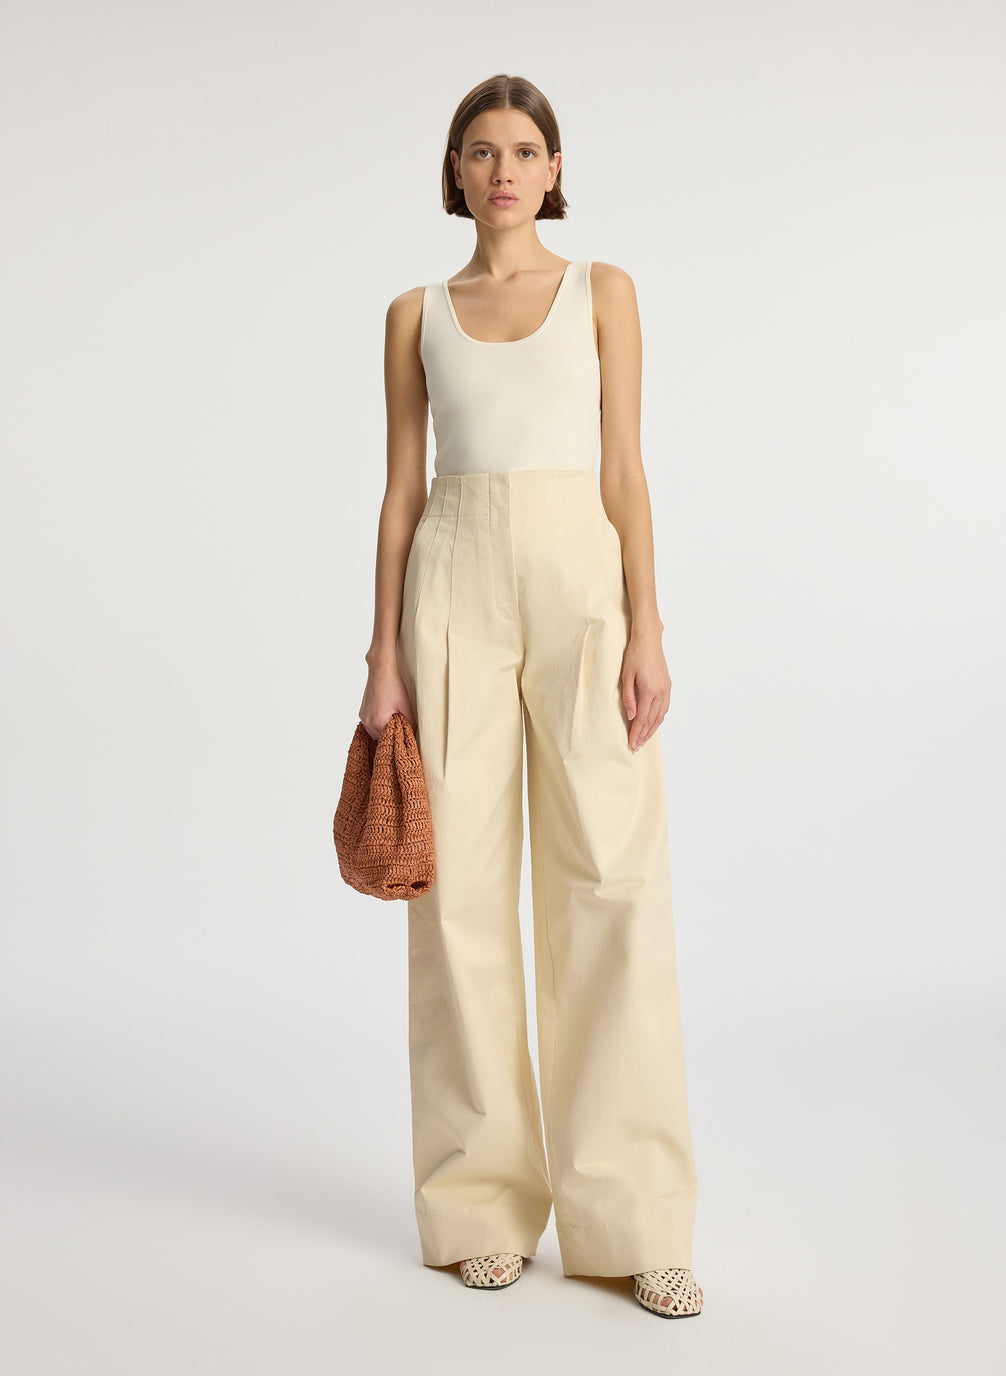 front view of woman wearing beige compact knit tank top and beige sateen wide leg pants